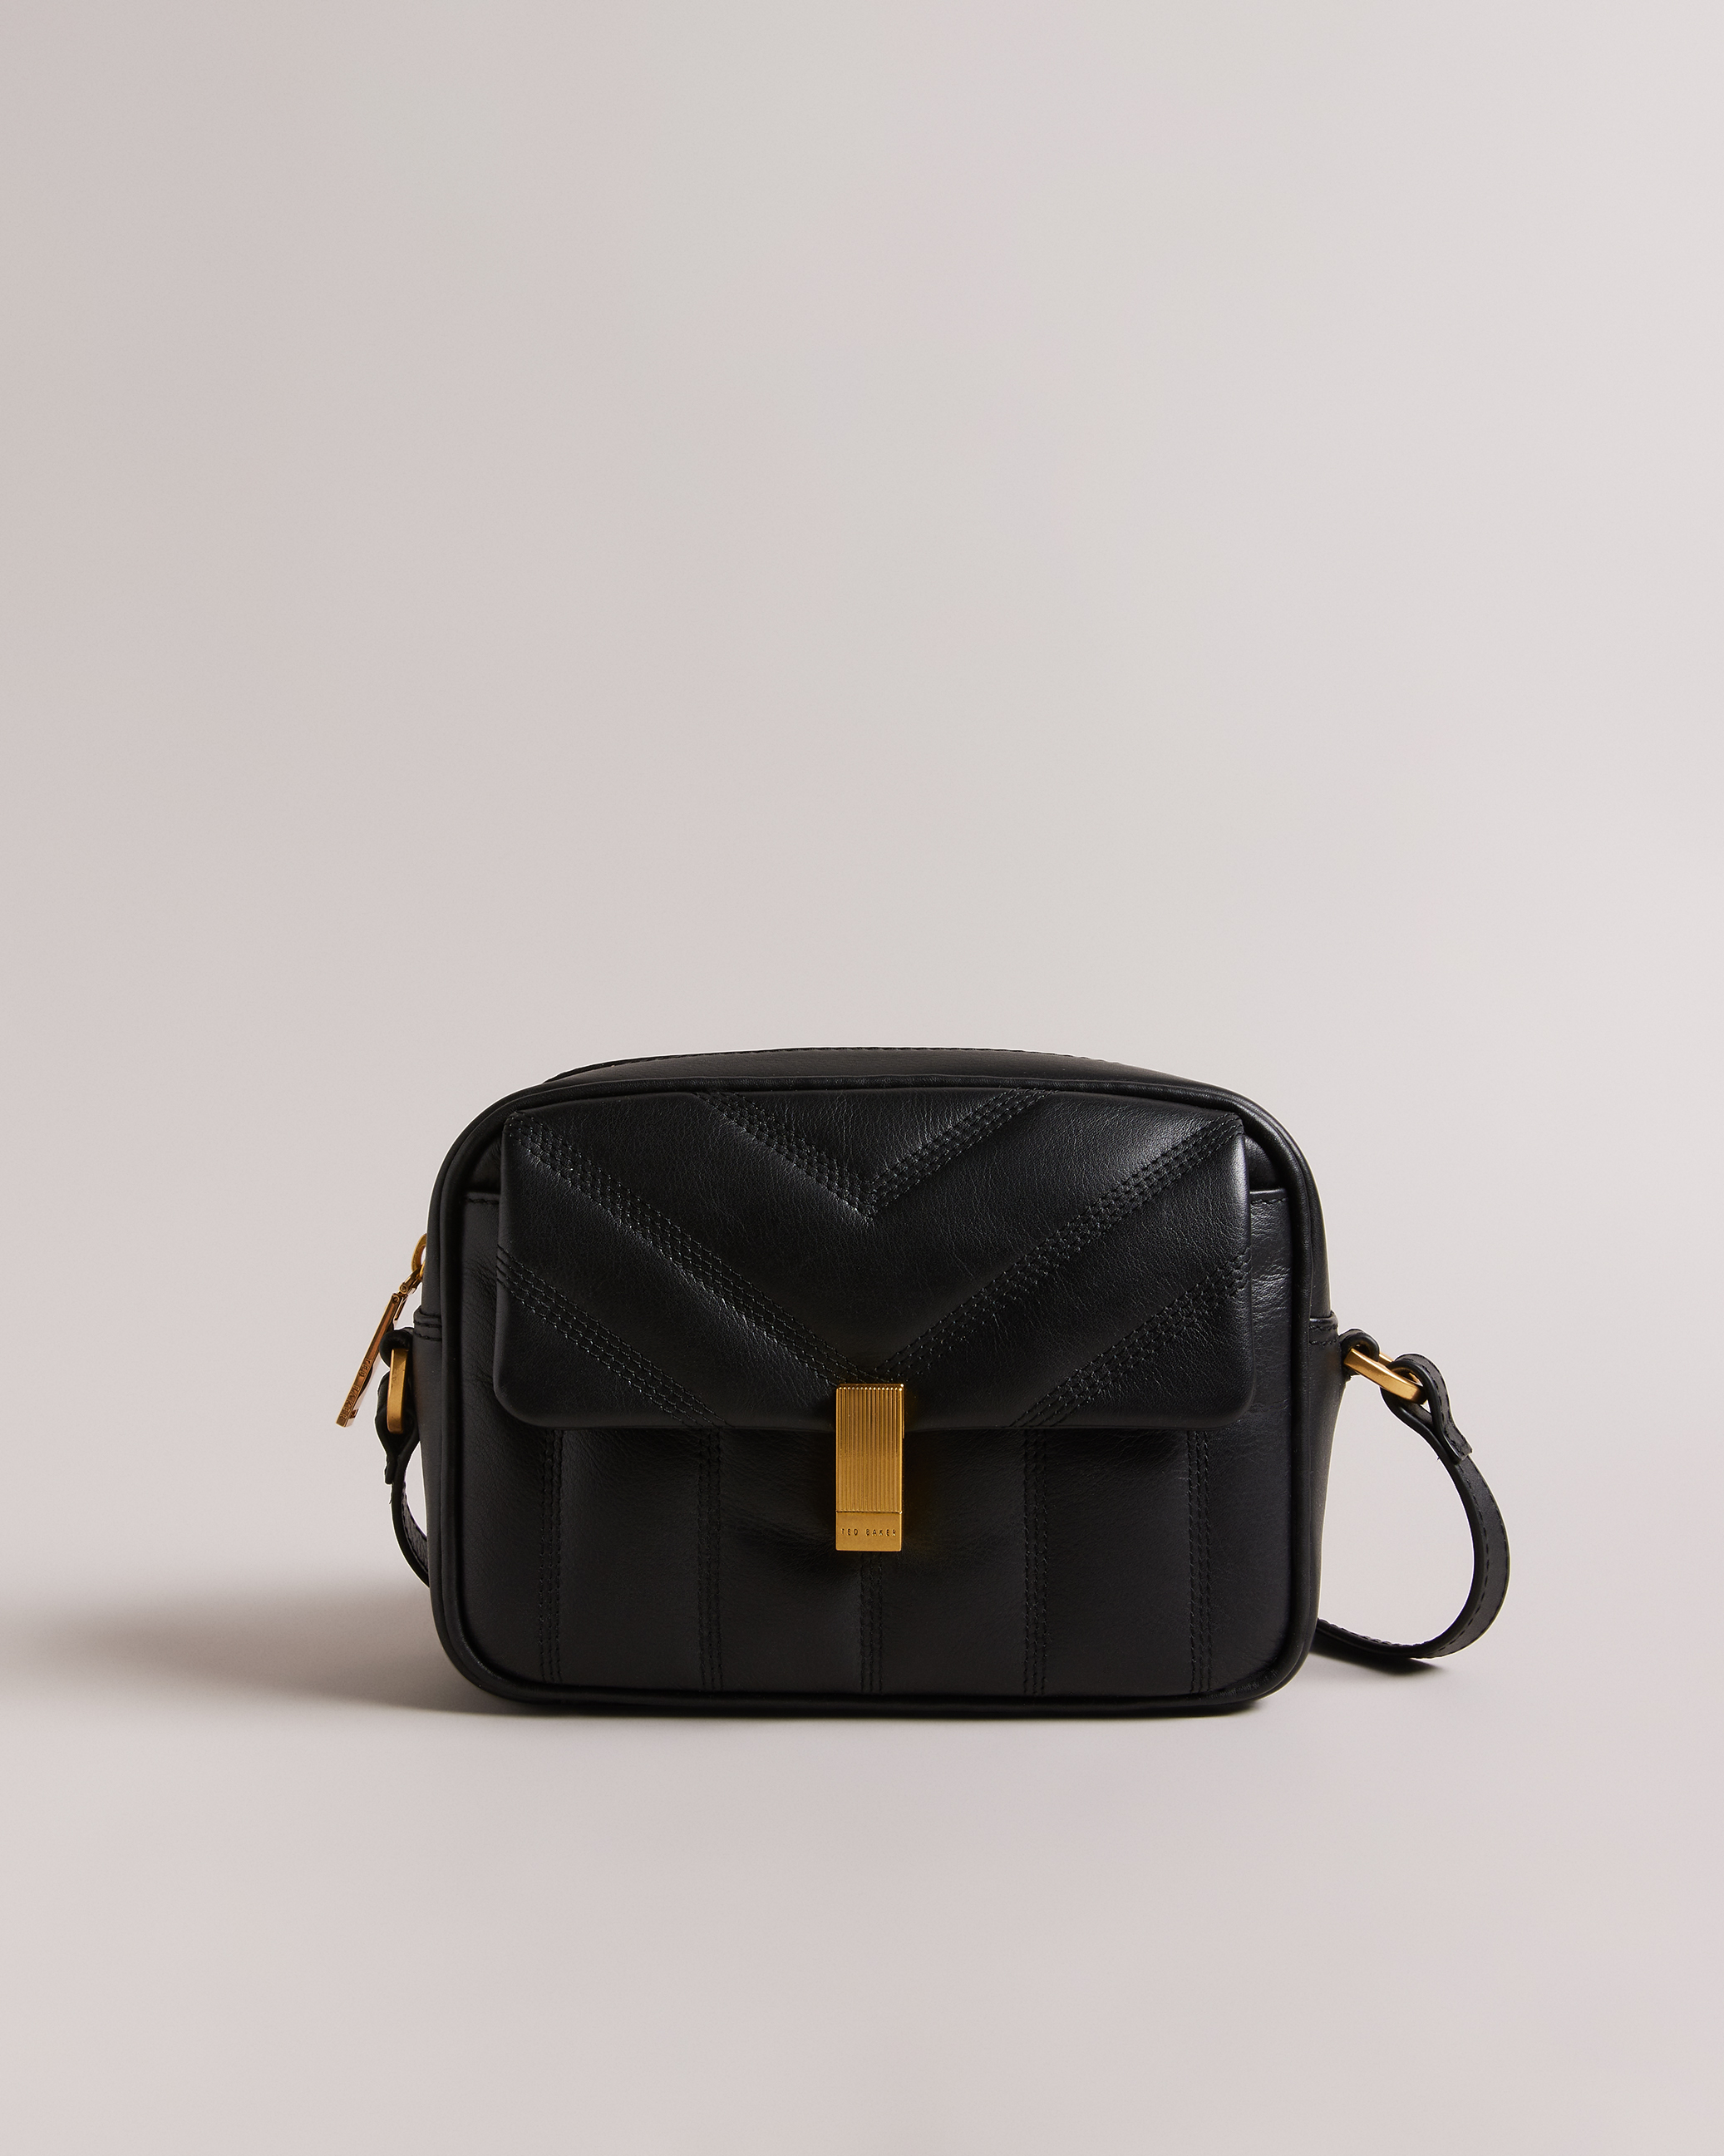 Ted Baker Cross Body + FREE SHIPPING, Bags